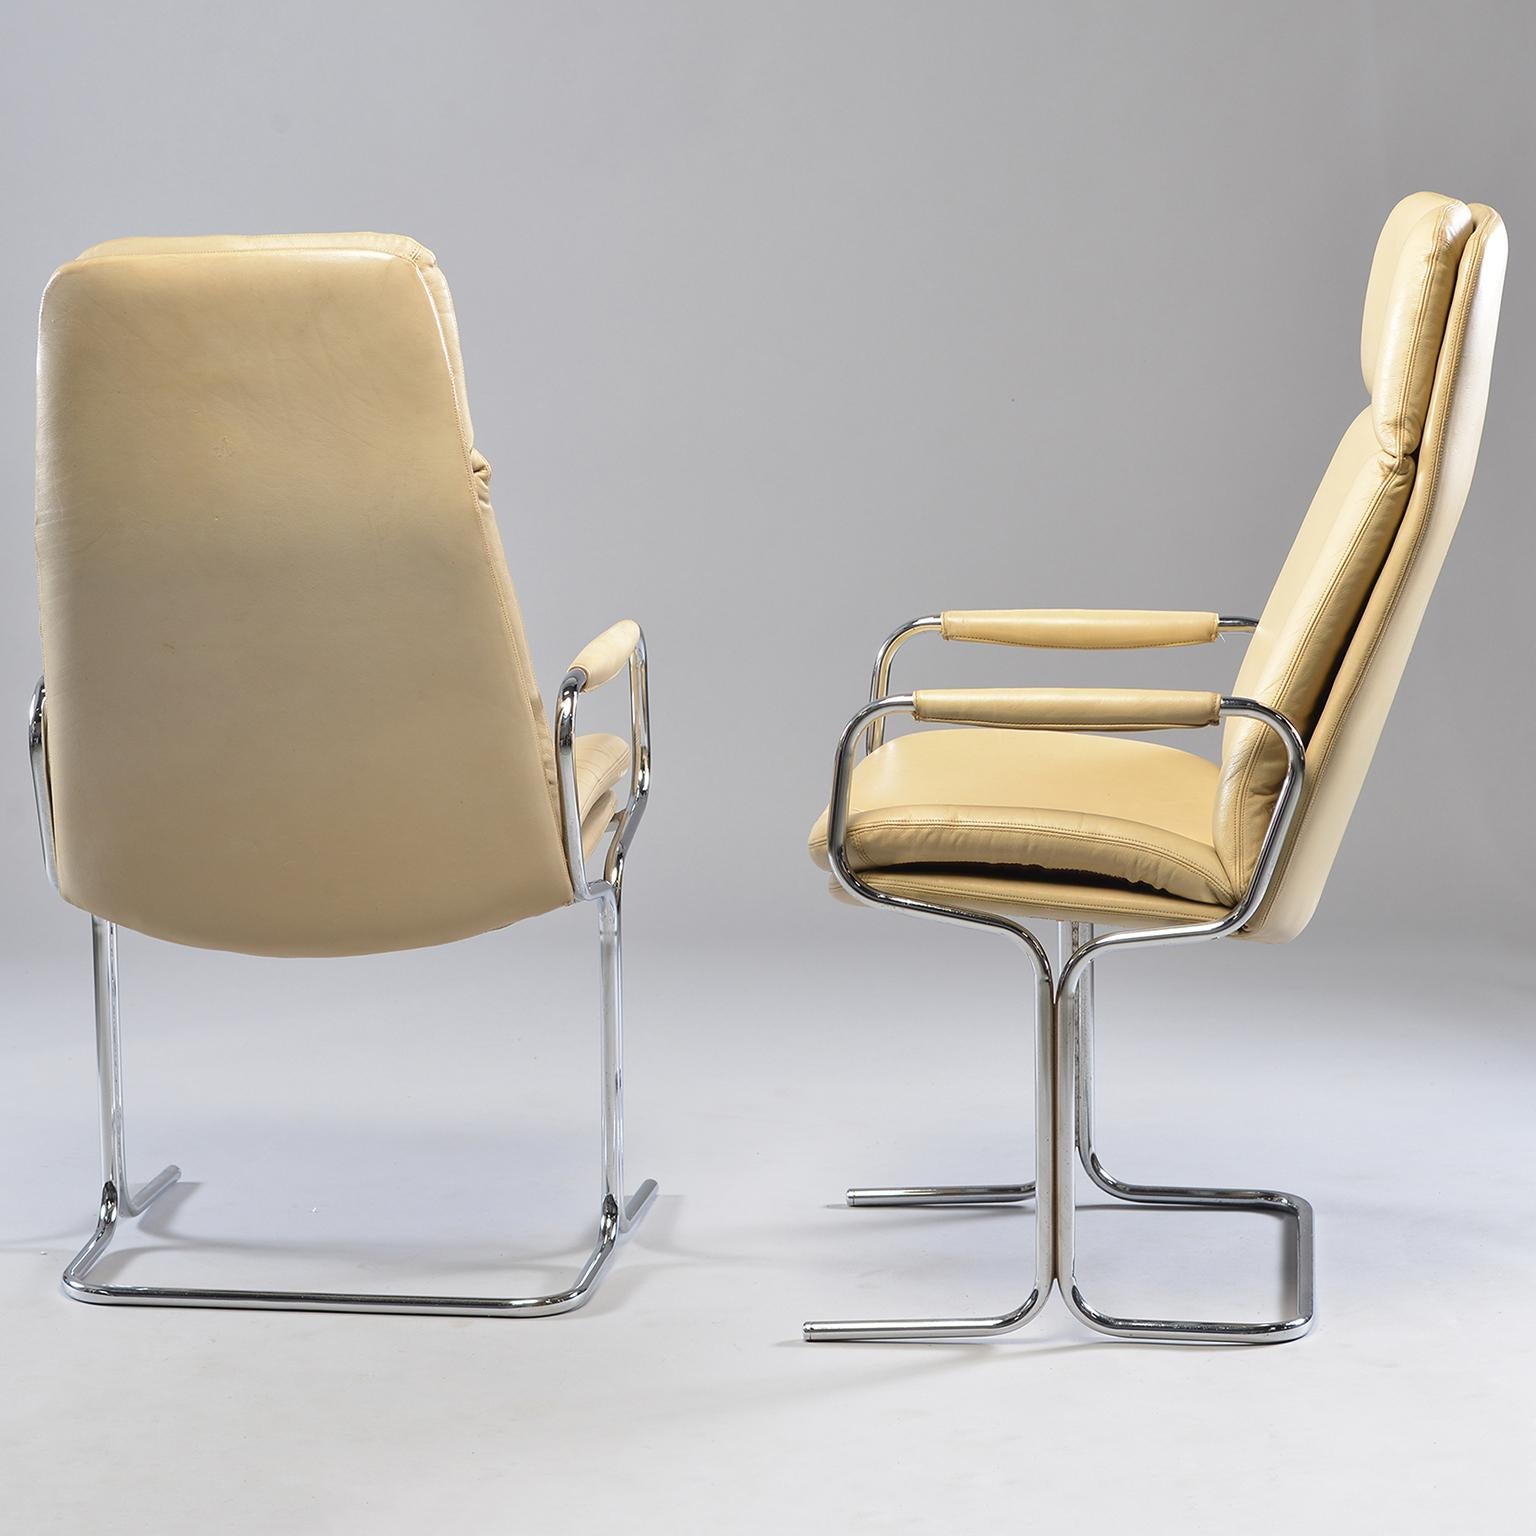 Mid-Century Modern Pair of Armchairs by Tim Bates for Eleganza Collection at Pieff